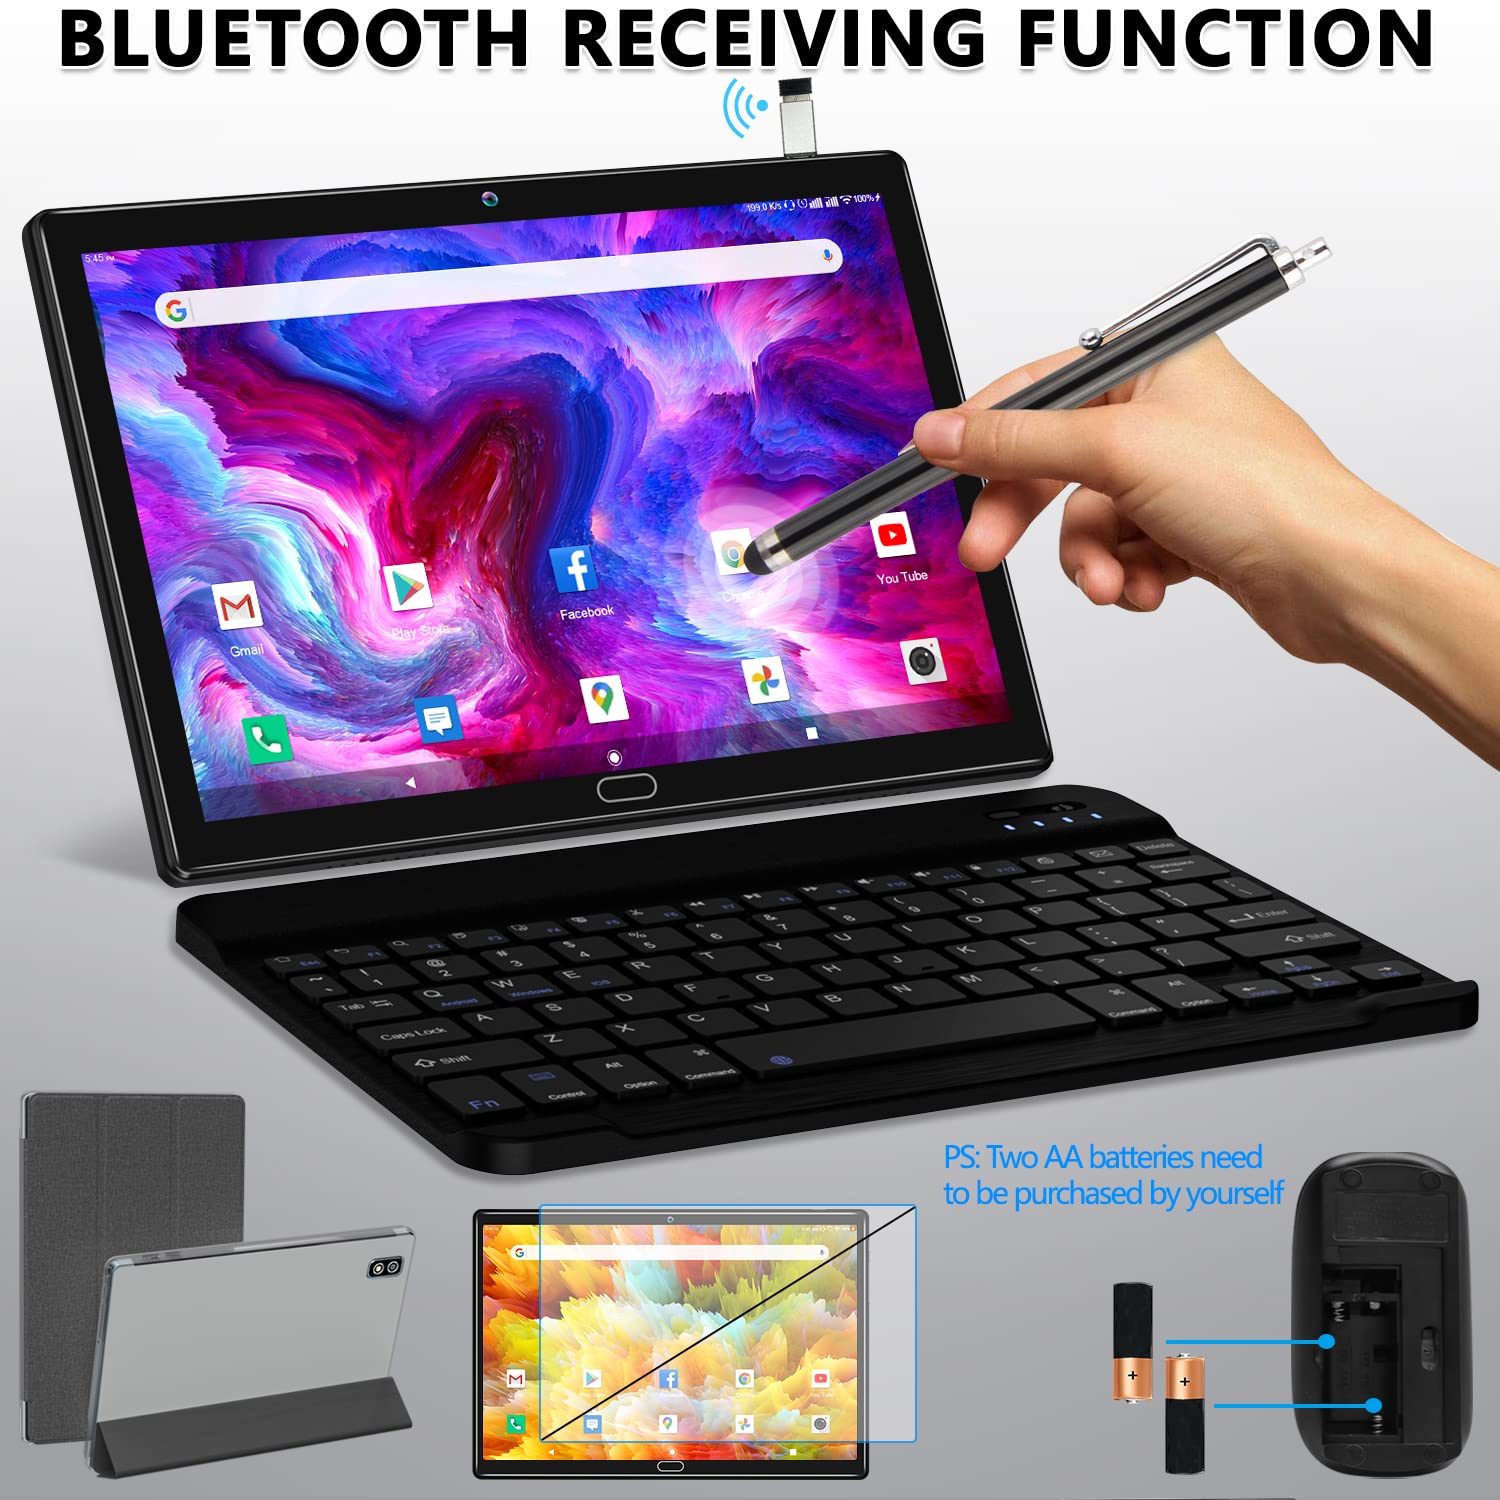 2023 Newest Android 11.0 Tablet, 2 in 1 Tablet 10.1 Inch, 4G Cellular Tablet with Keyboard, 64GB ROM + 4GB RAM, Octa-Core Processor, 2 Sim Slot, 13MP Camera, GPS/ WIFI/ Bluetooth/ Mouse/ Stylus(Black)